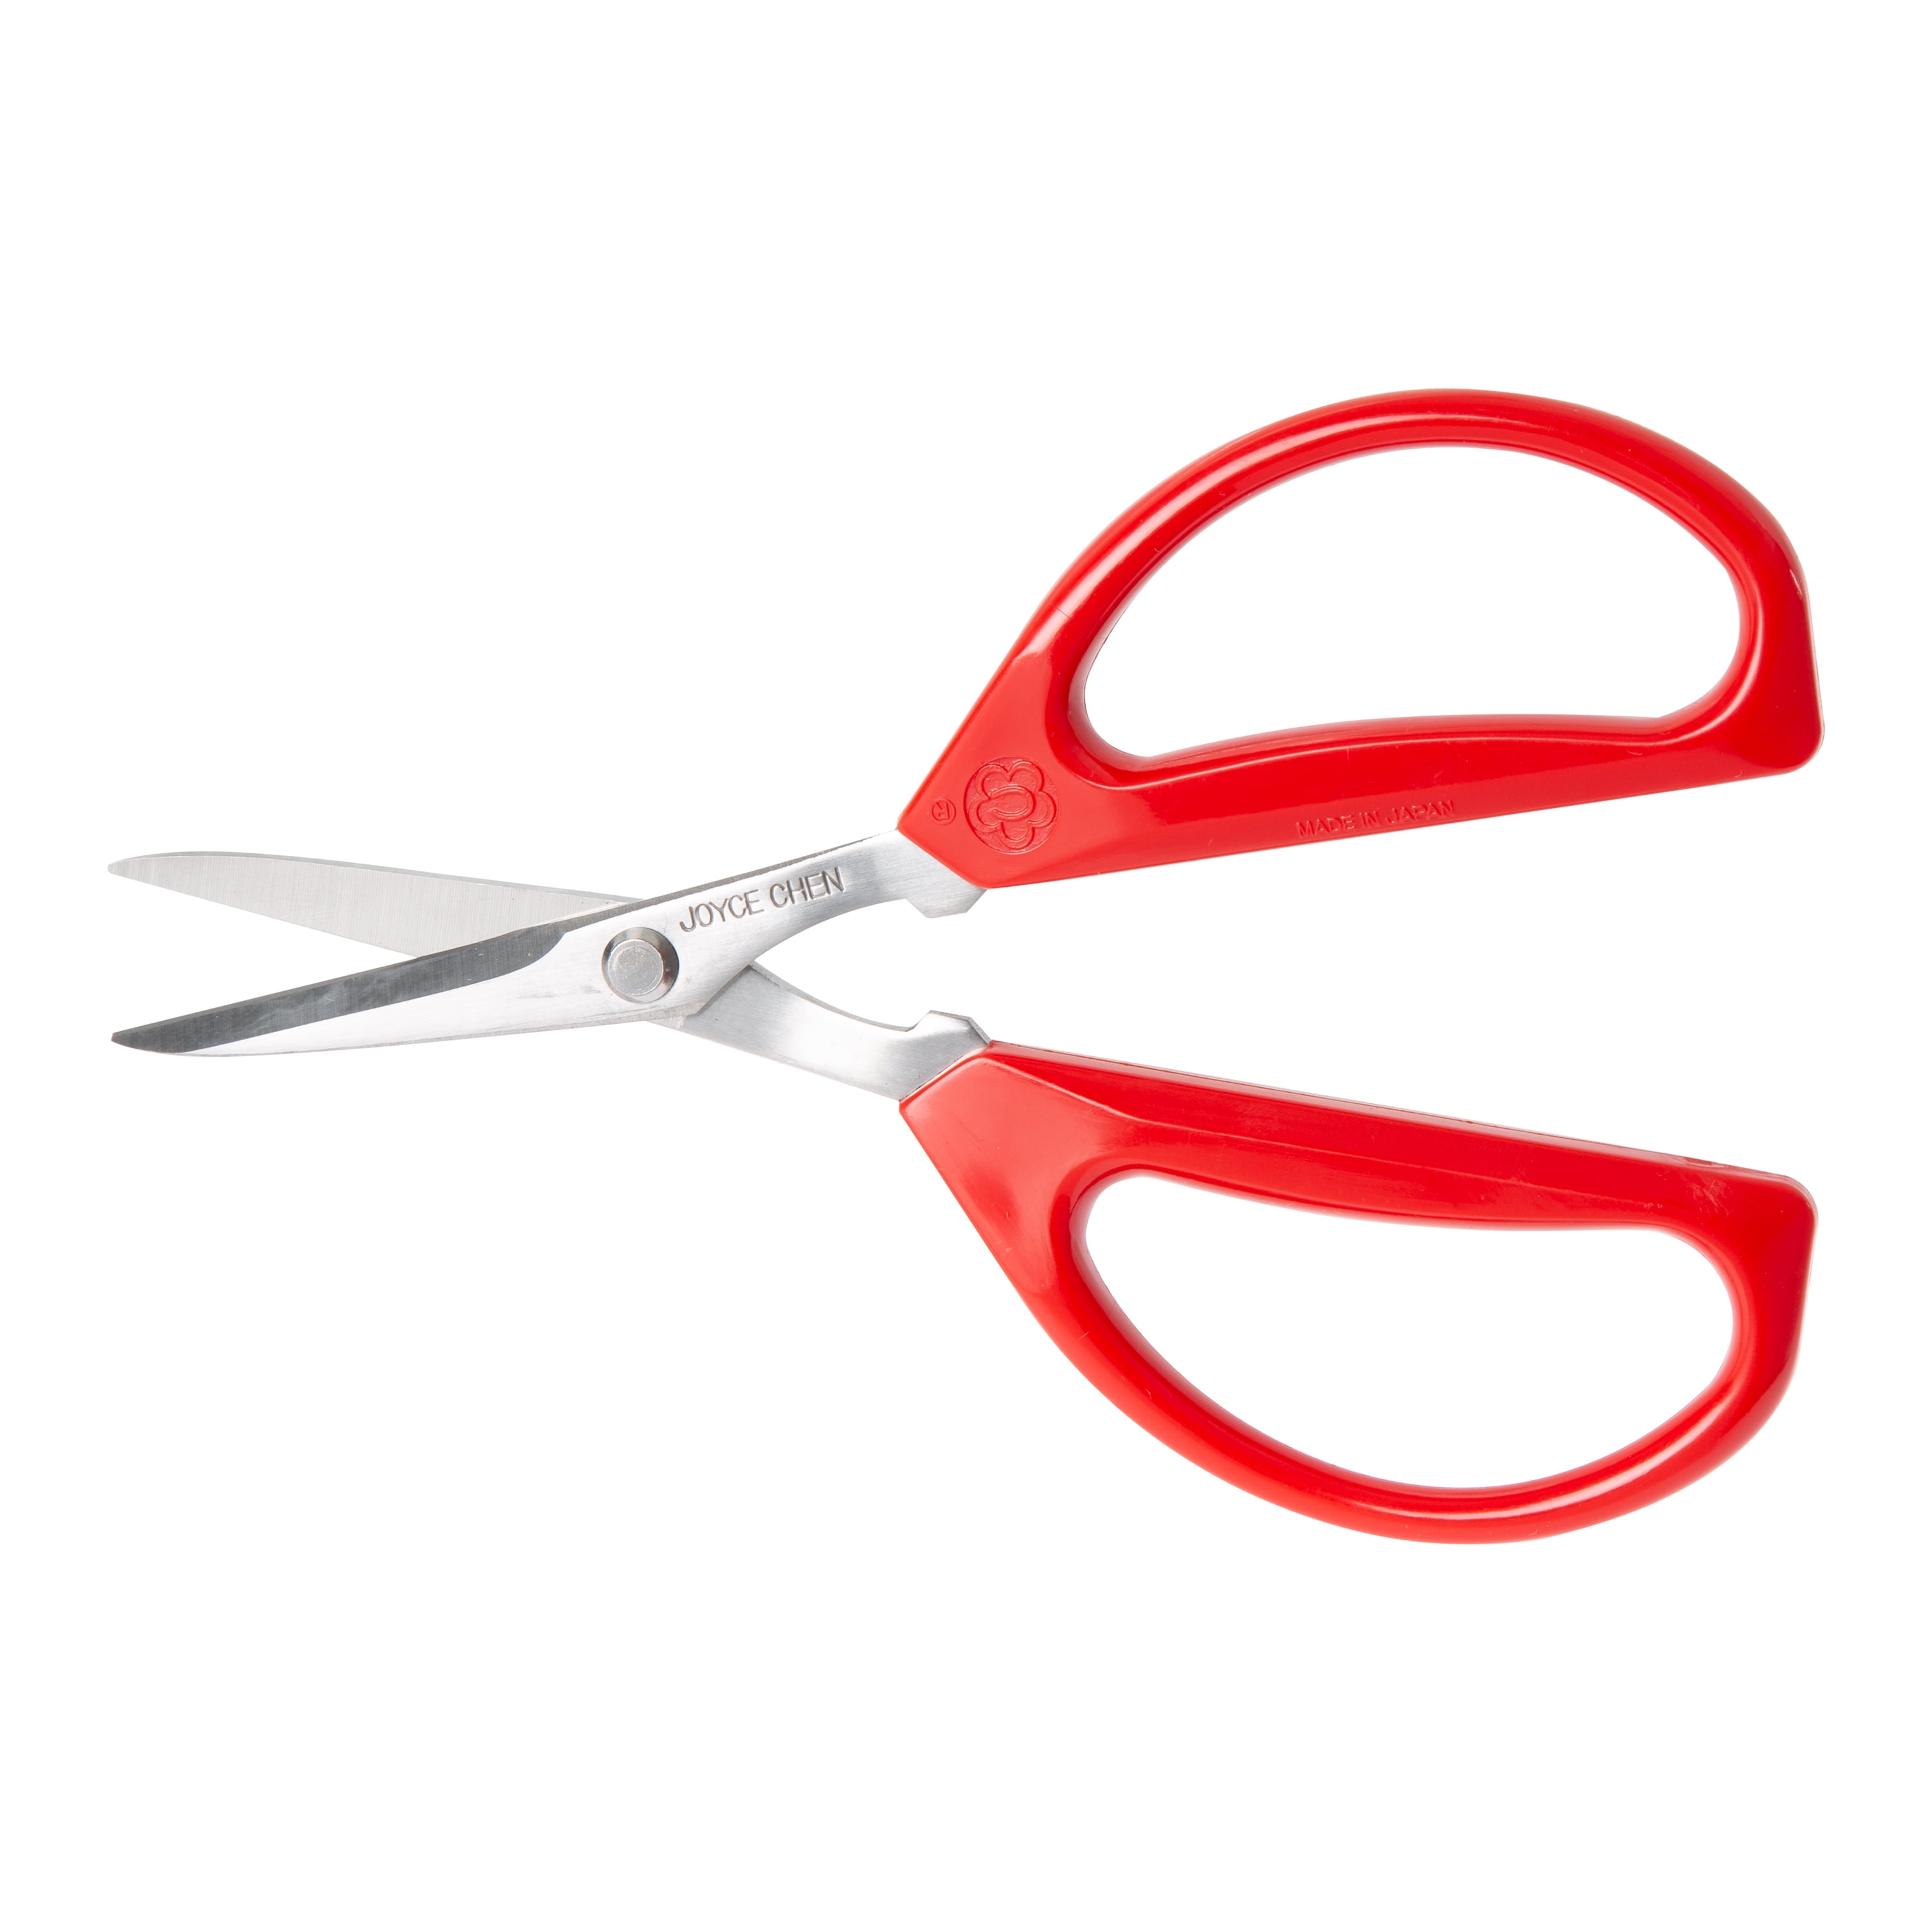 JOYCE CHEN 9 in. Multi Use Stainless Steel Kitchen Shears J51-0735 - The  Home Depot